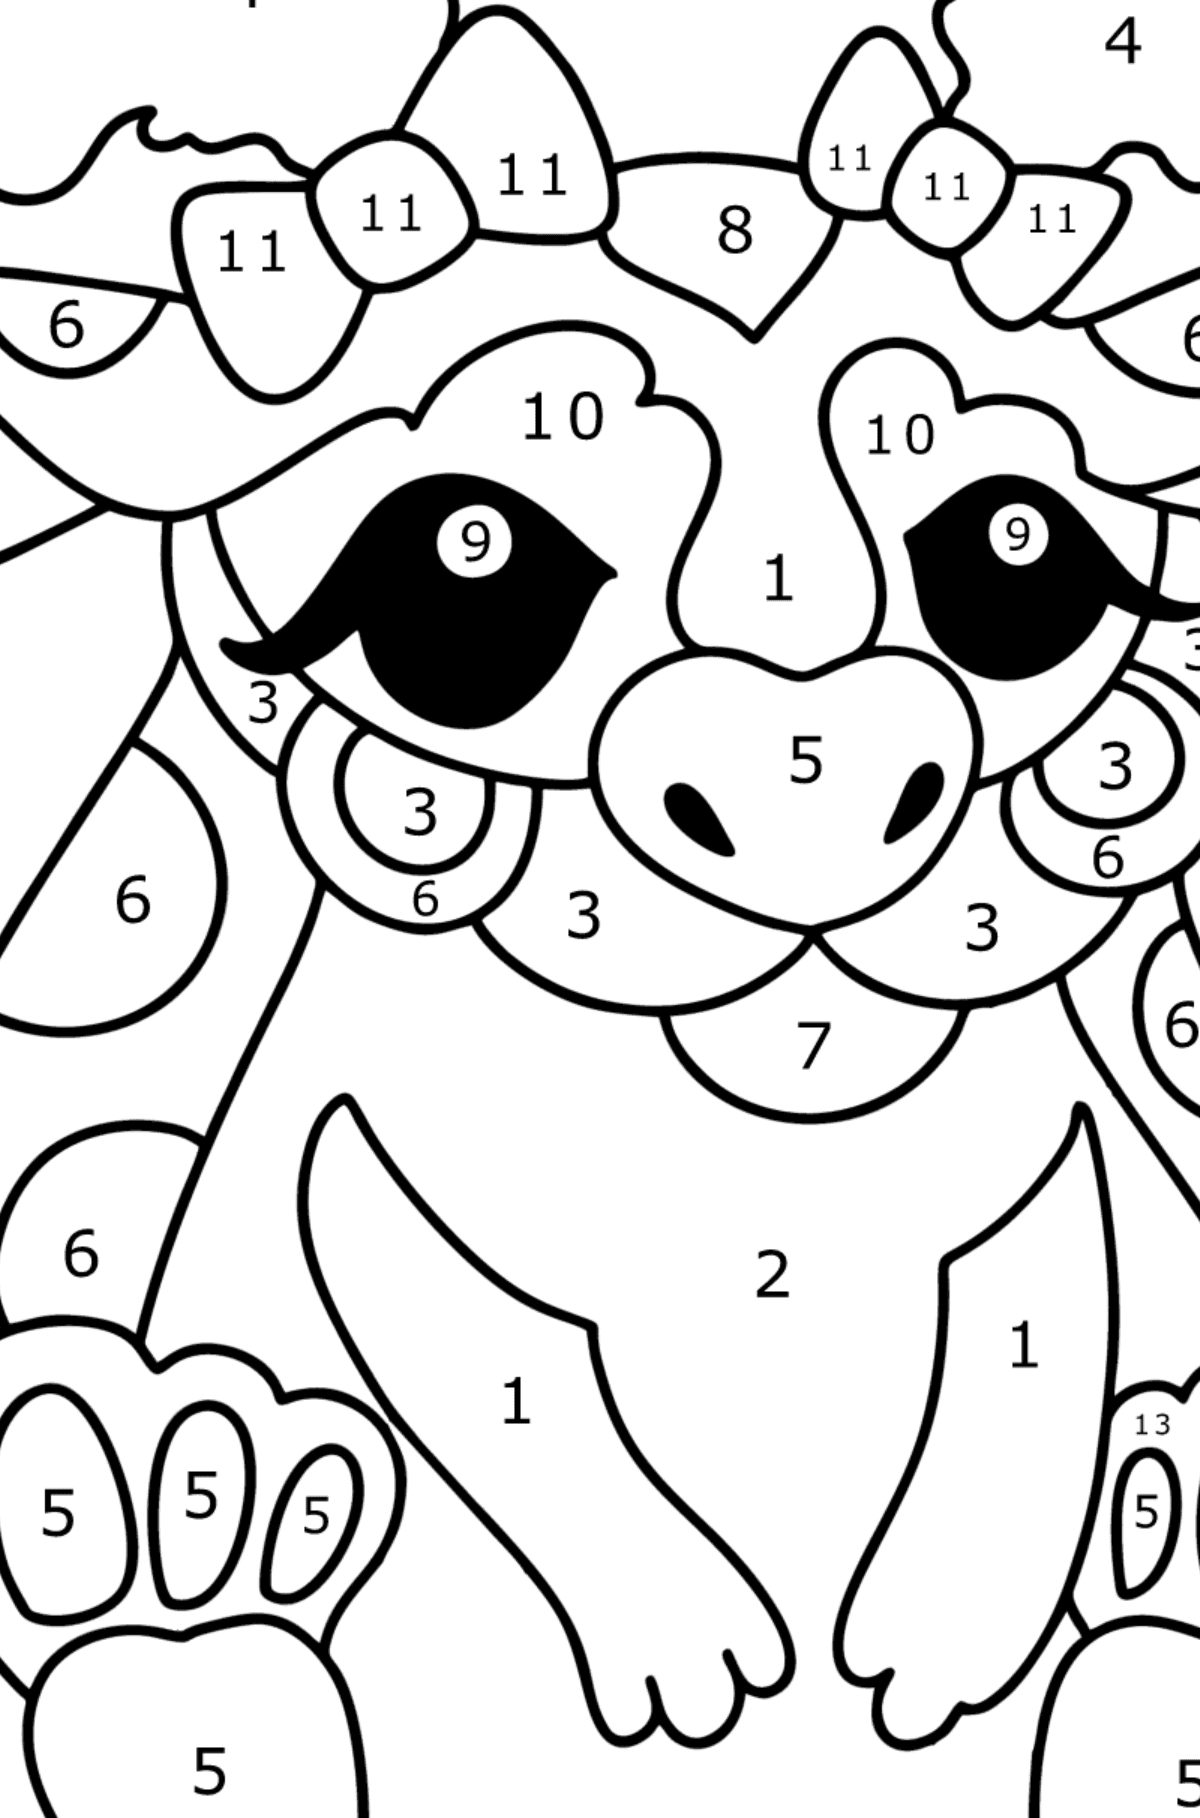 Dragon girl coloring page - Coloring by Numbers for Kids